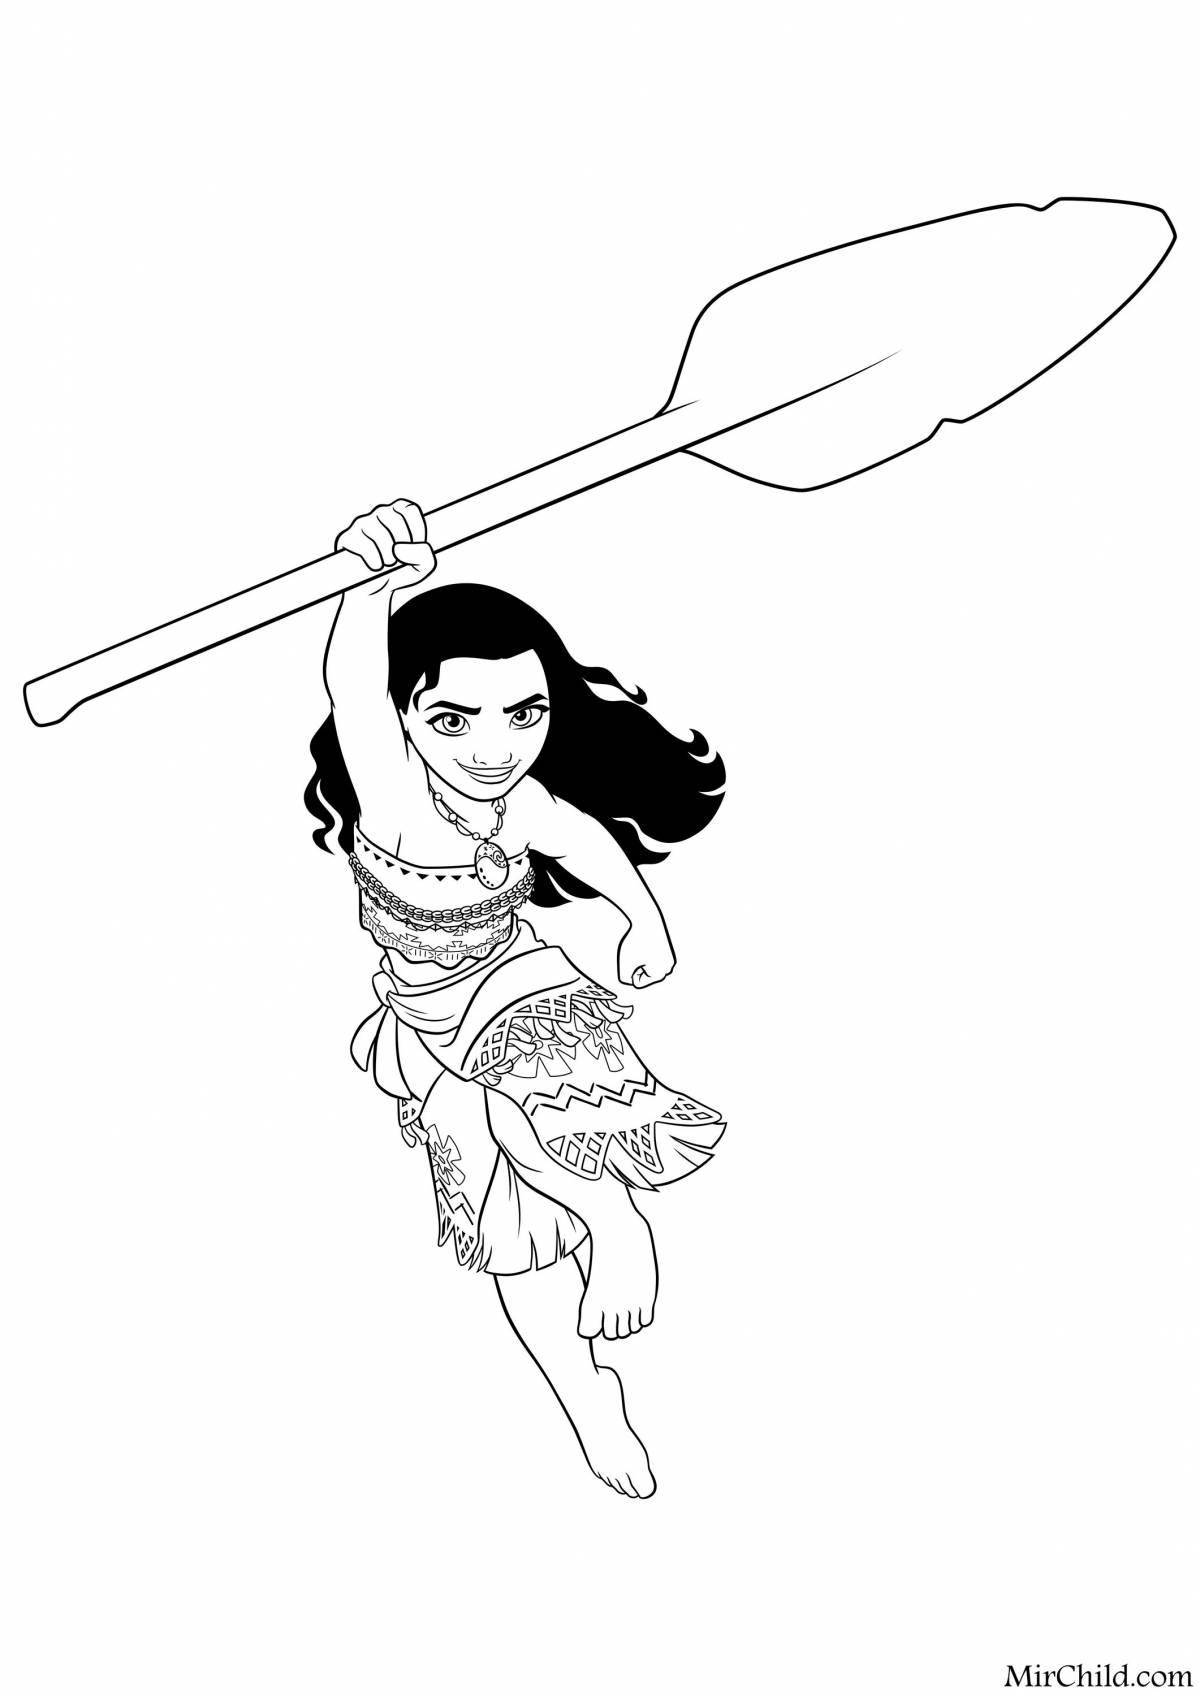 Moana playful coloring for girls